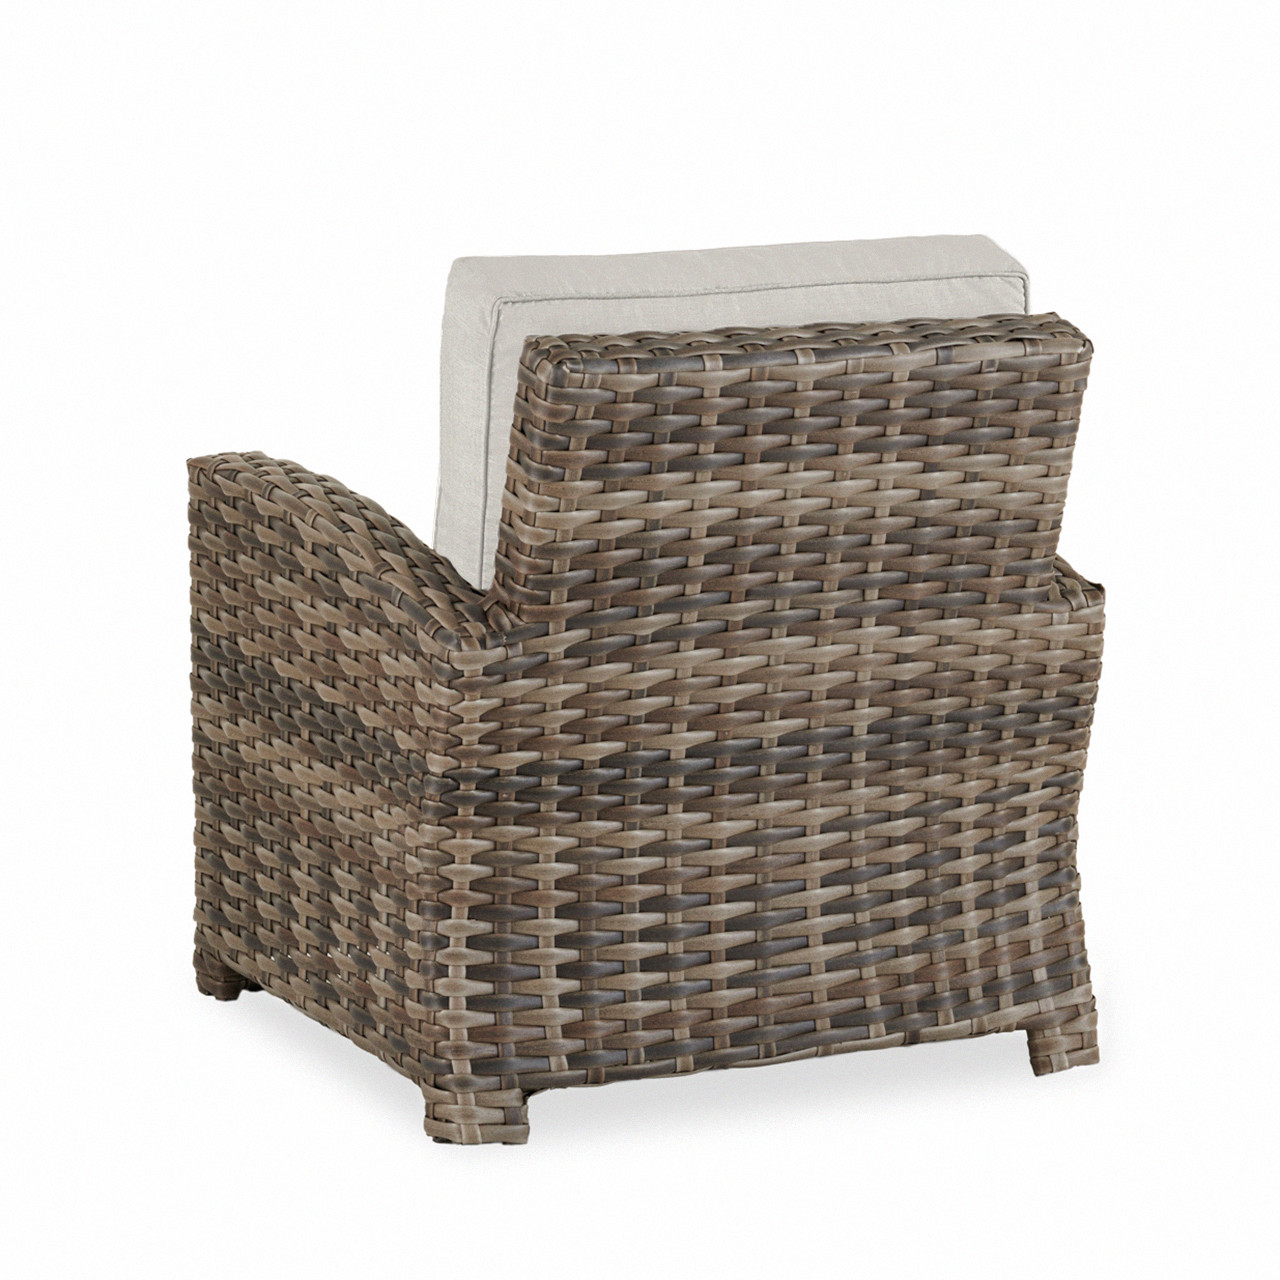 Contempo Husk Outdoor Wicker with Cushions Club Chair